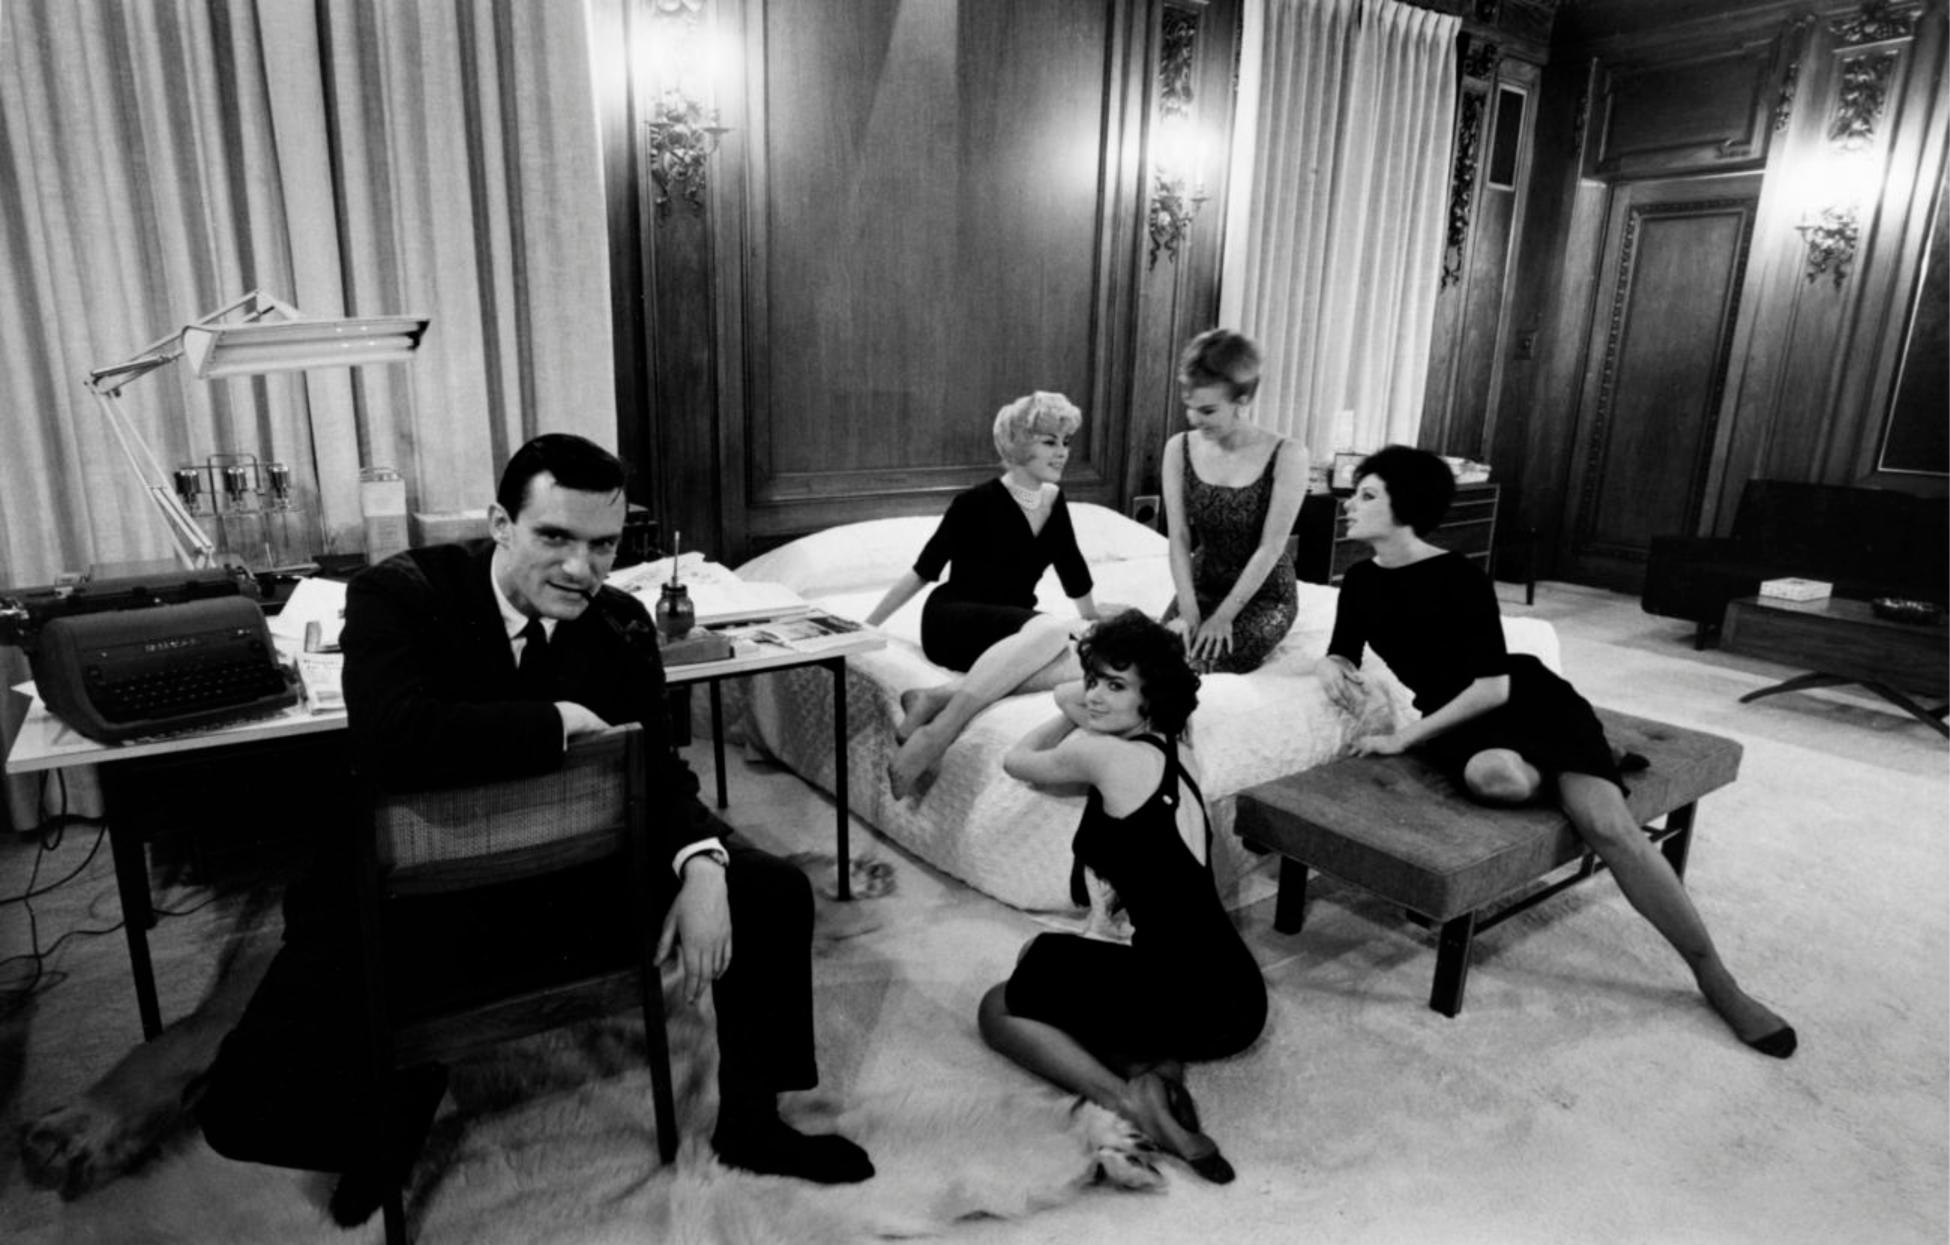 Hugh Hefner in His Bedroom Office, Chicago 1961, Black and White Photography